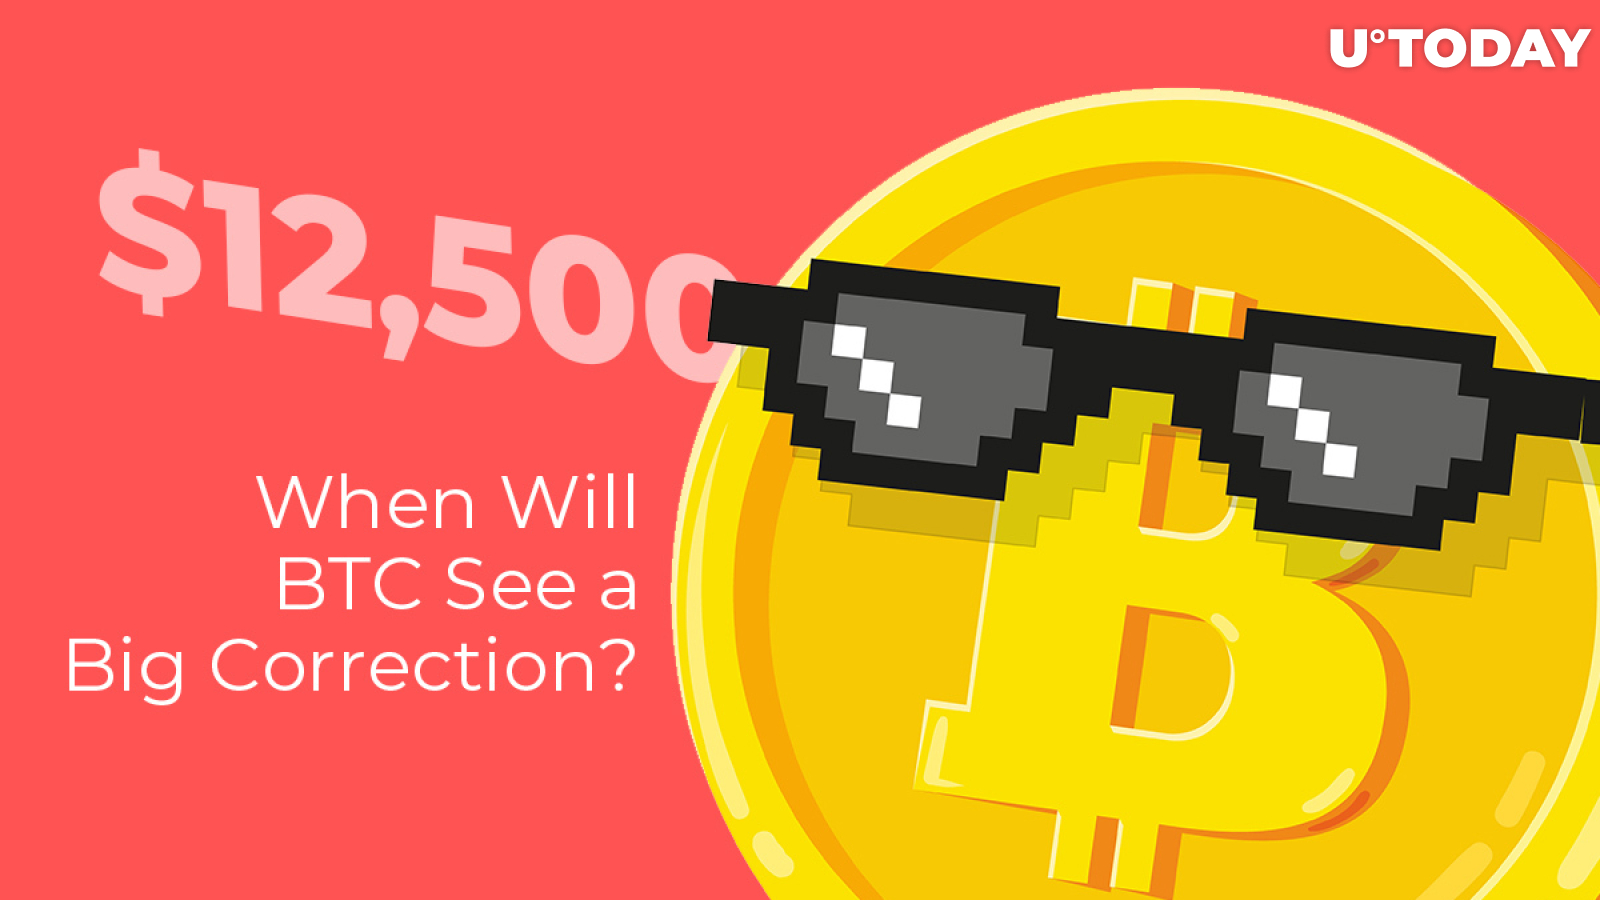 Bitcoin Price Surges Above $12,500. When Will BTC See a Big Correction?